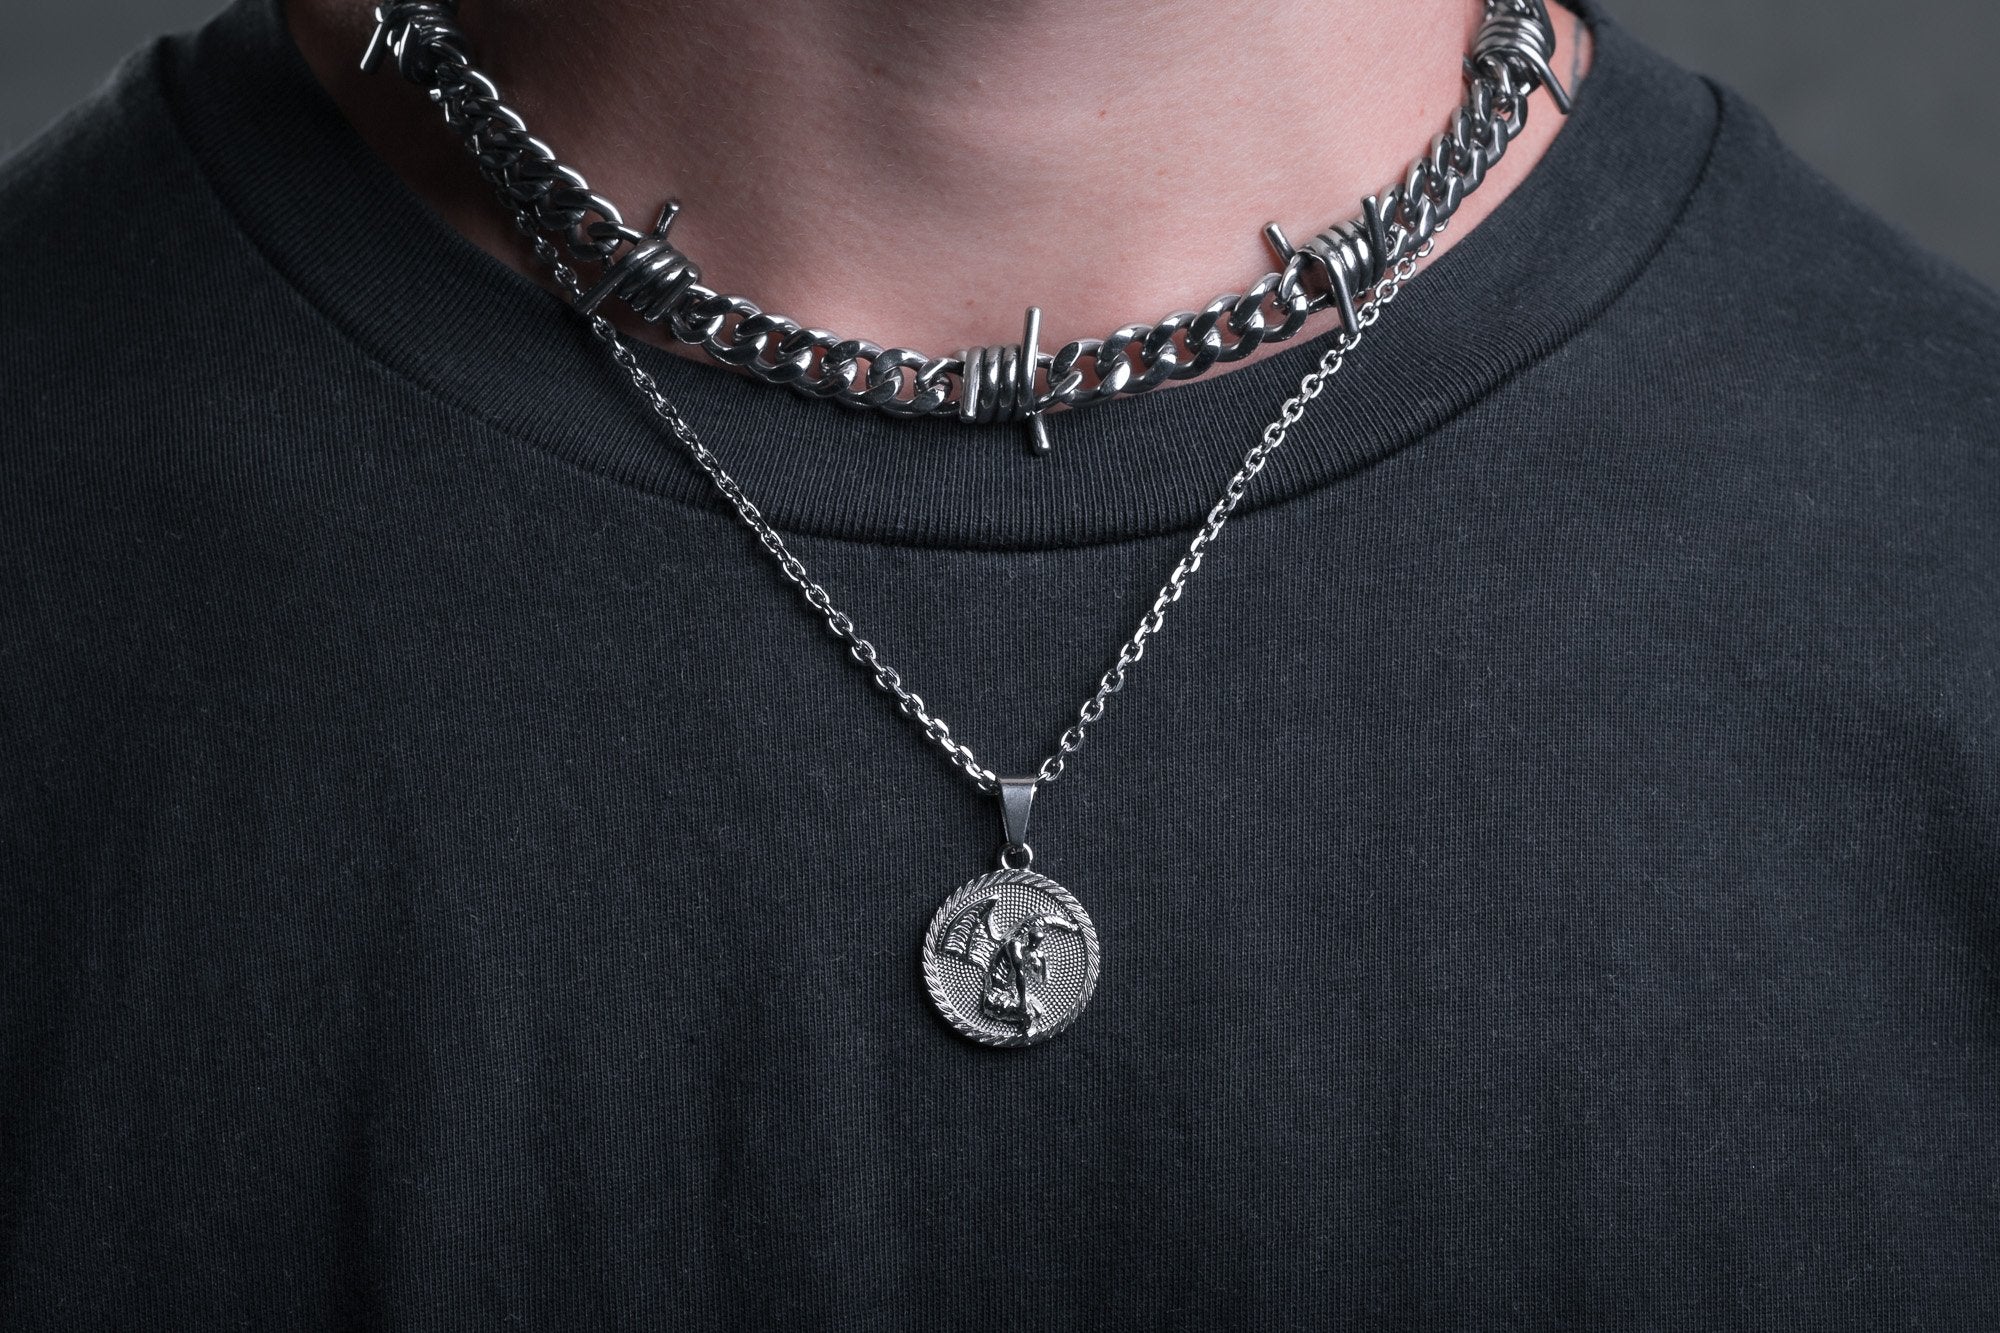 How To Style A Men's Pendant Necklace